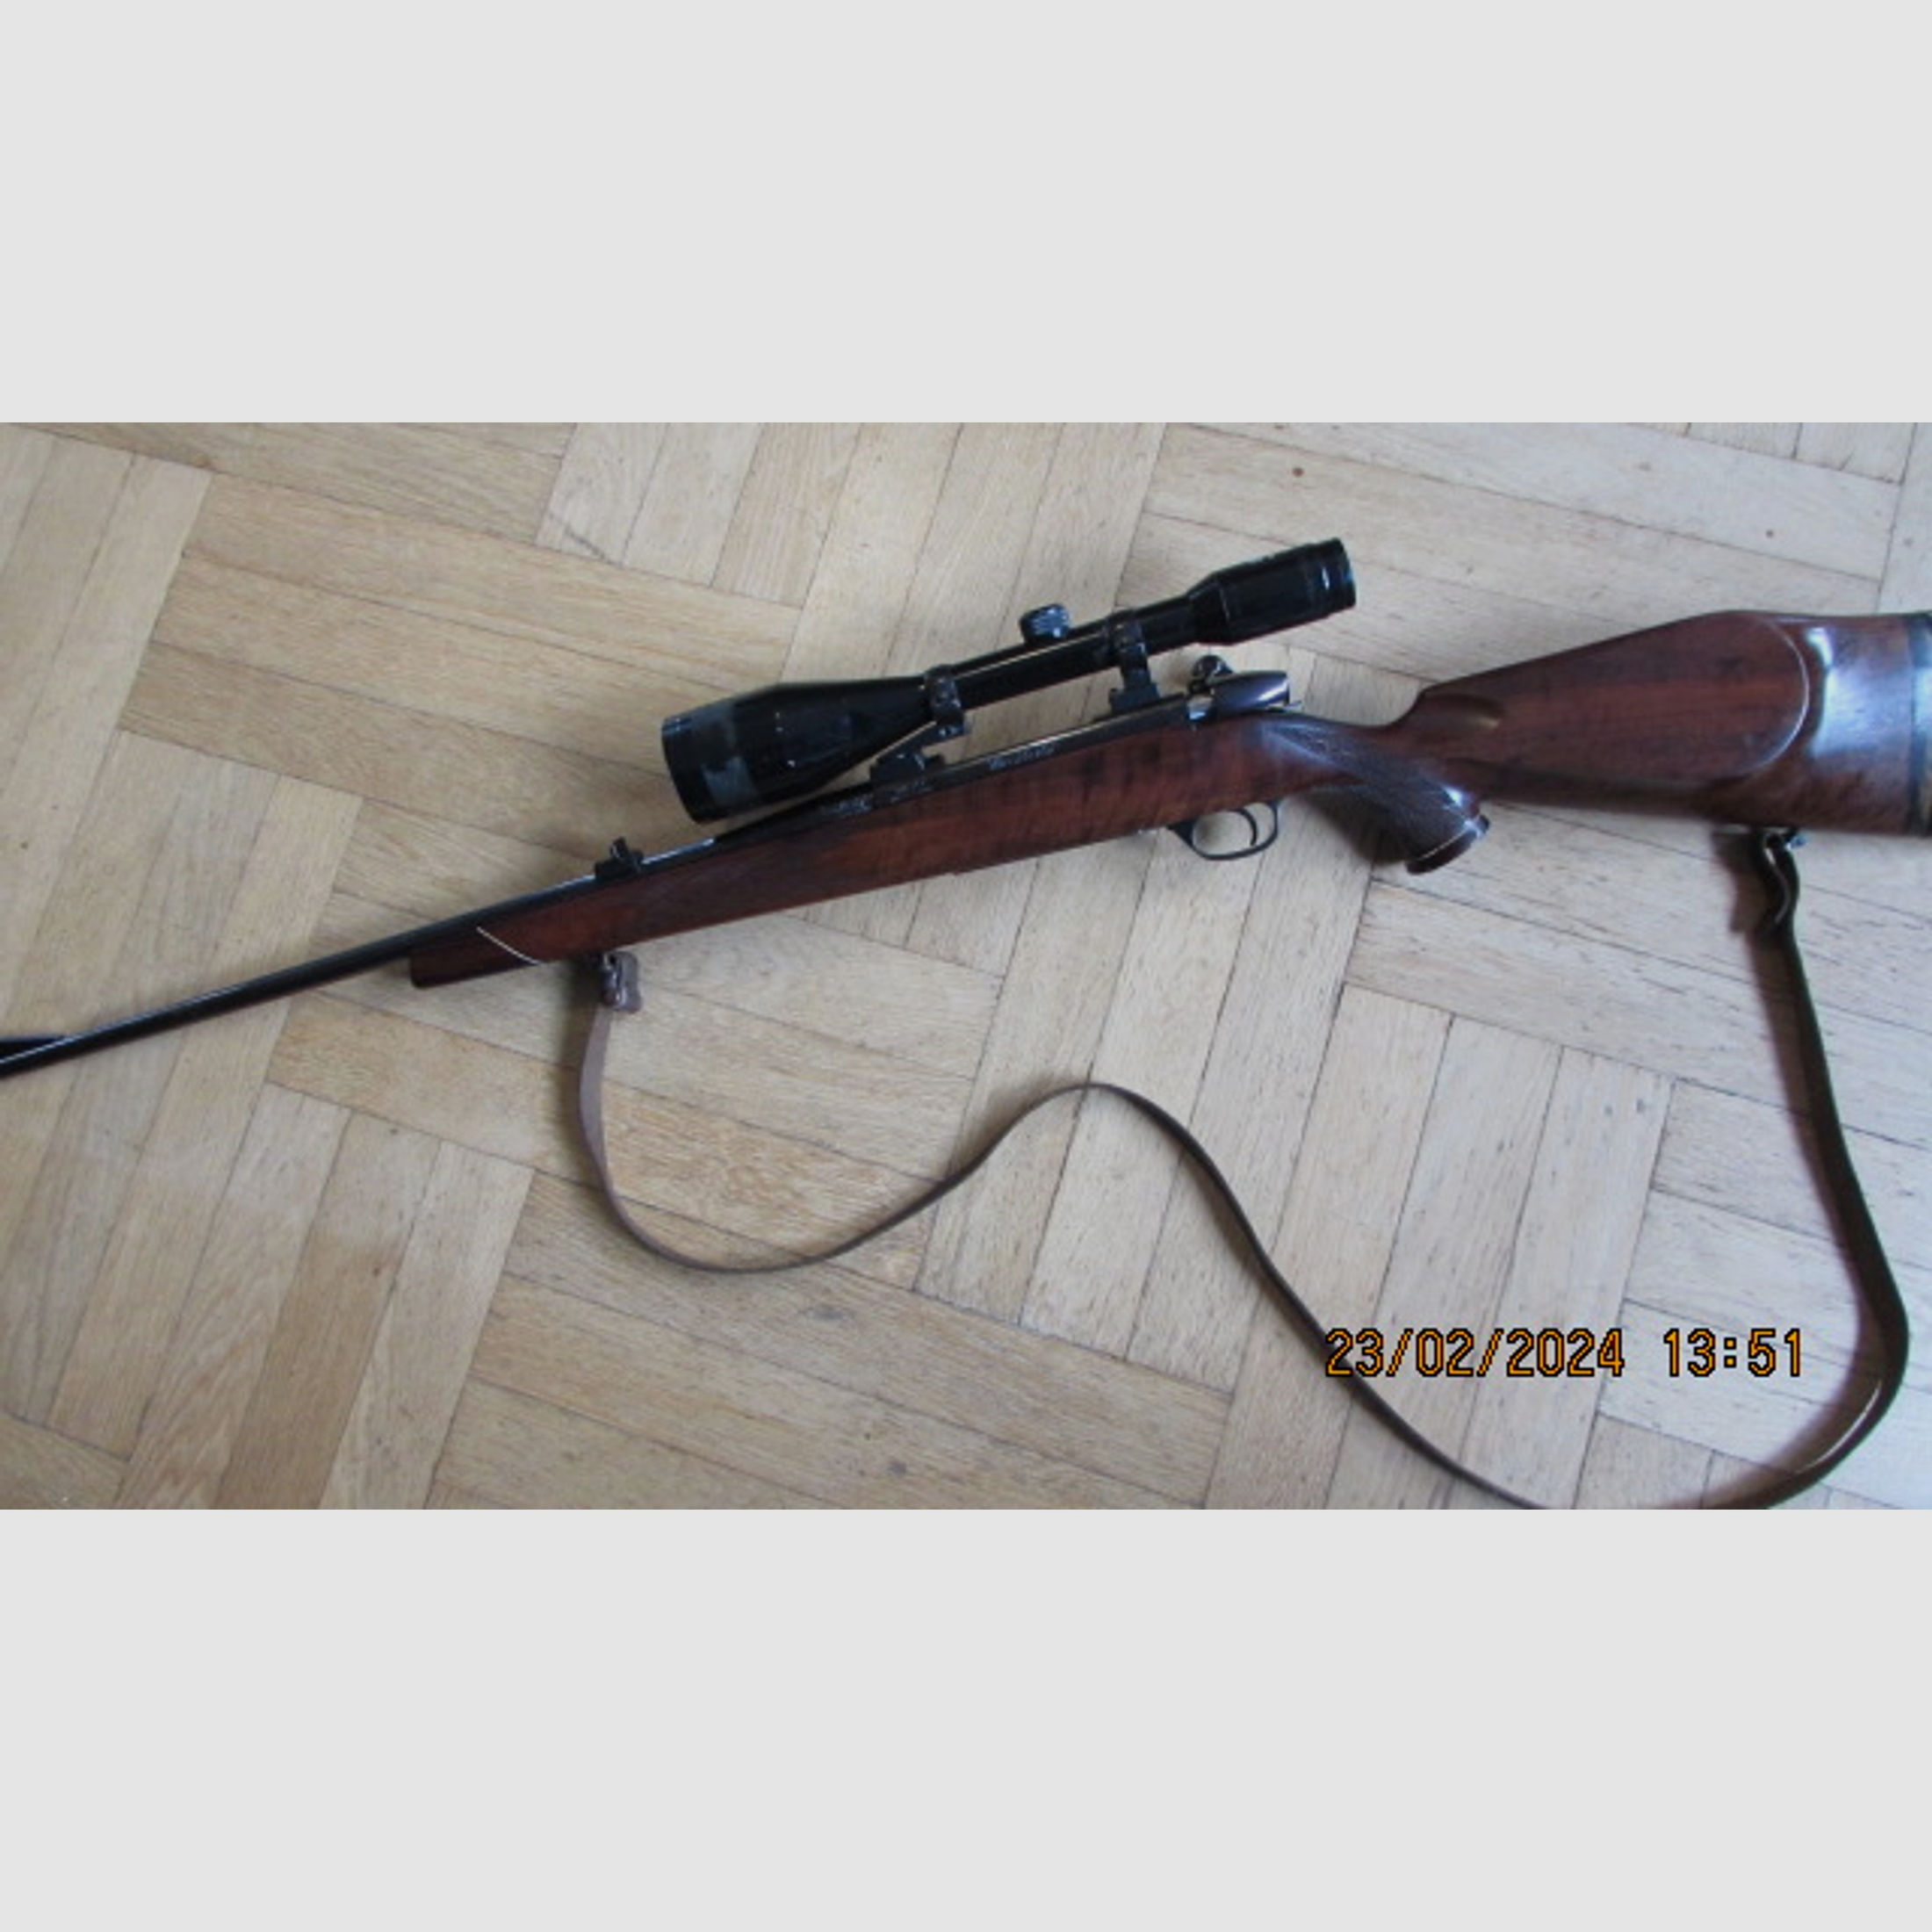 Weatherby Mark V, Kal. 7mmWeath(Weatherby Magnum), ZF Kahles Wien Helia L 8x56 Abs. 1